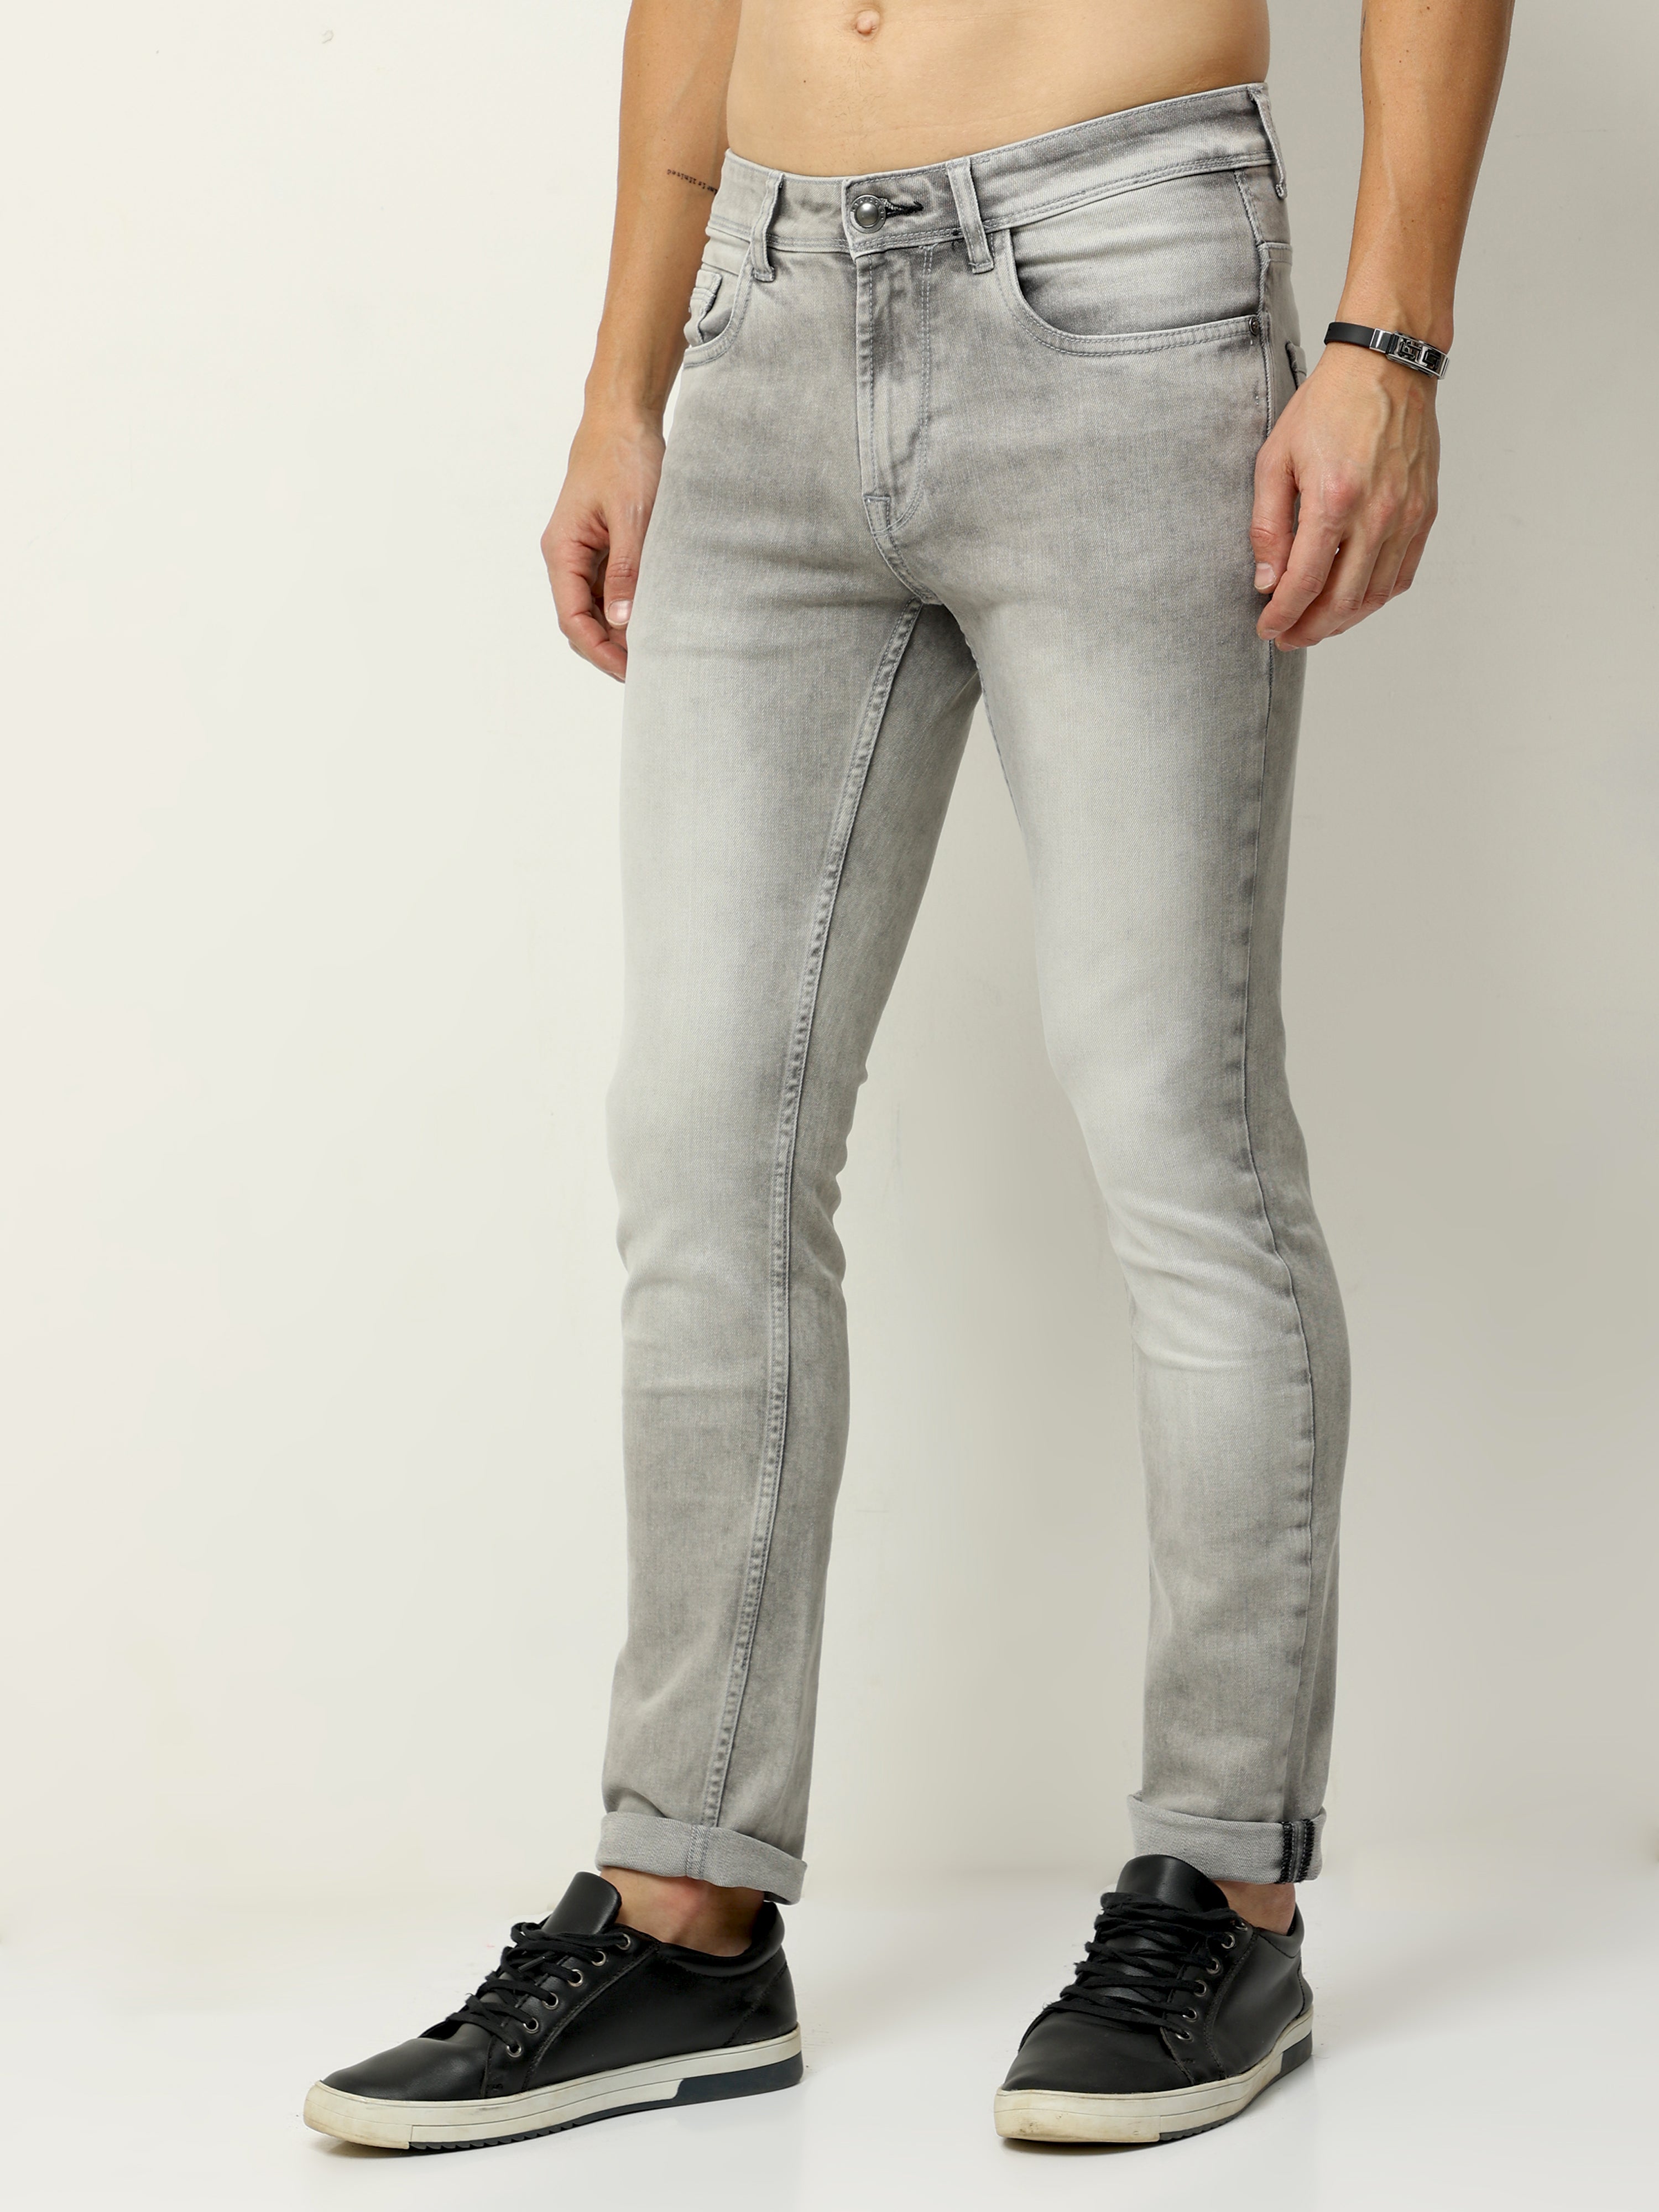 Buy Grey Jeans for Men by US Polo Assn Online  Ajiocom